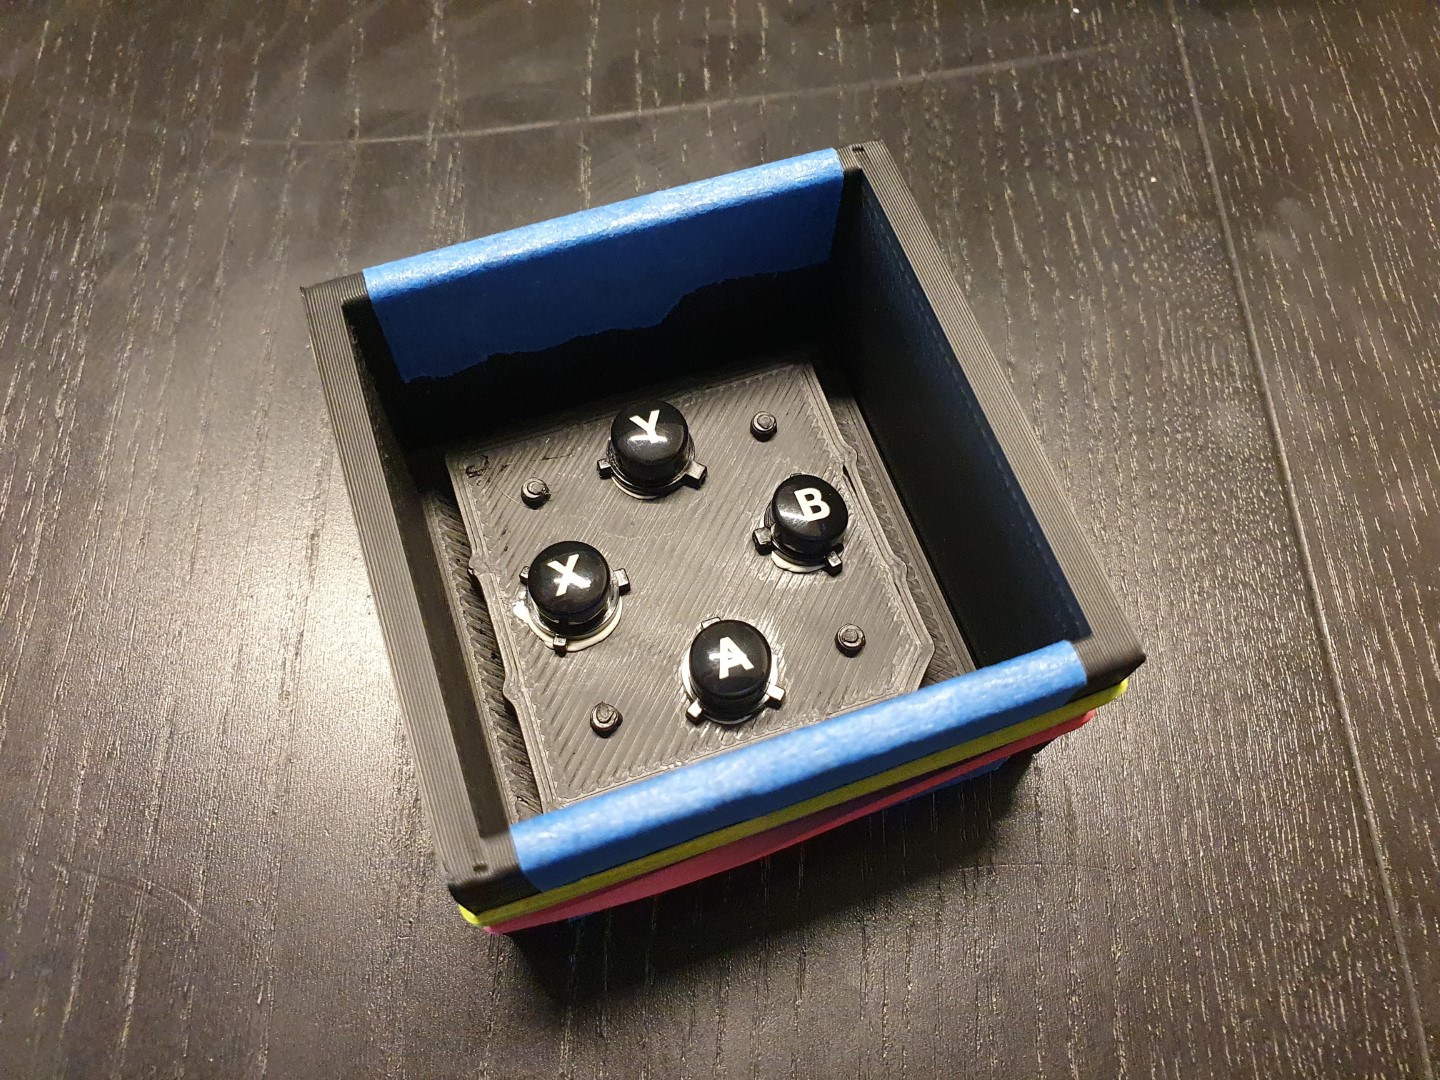 The assembled mold box for the first pour. The buttons are mounted to the bottom. The seems seasled with tape. Two rubber bands go around.